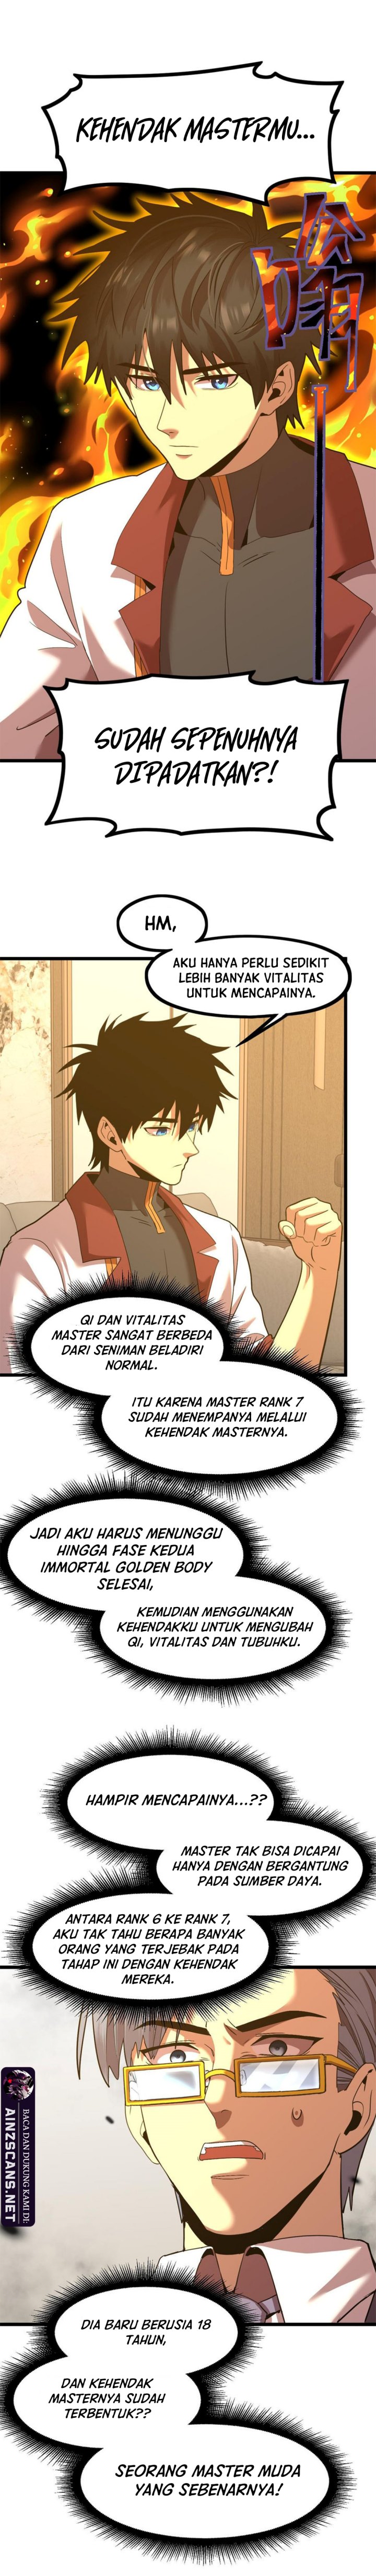 Leveling In The Future (Apex Future Martial Arts) Chapter 93 Image 17